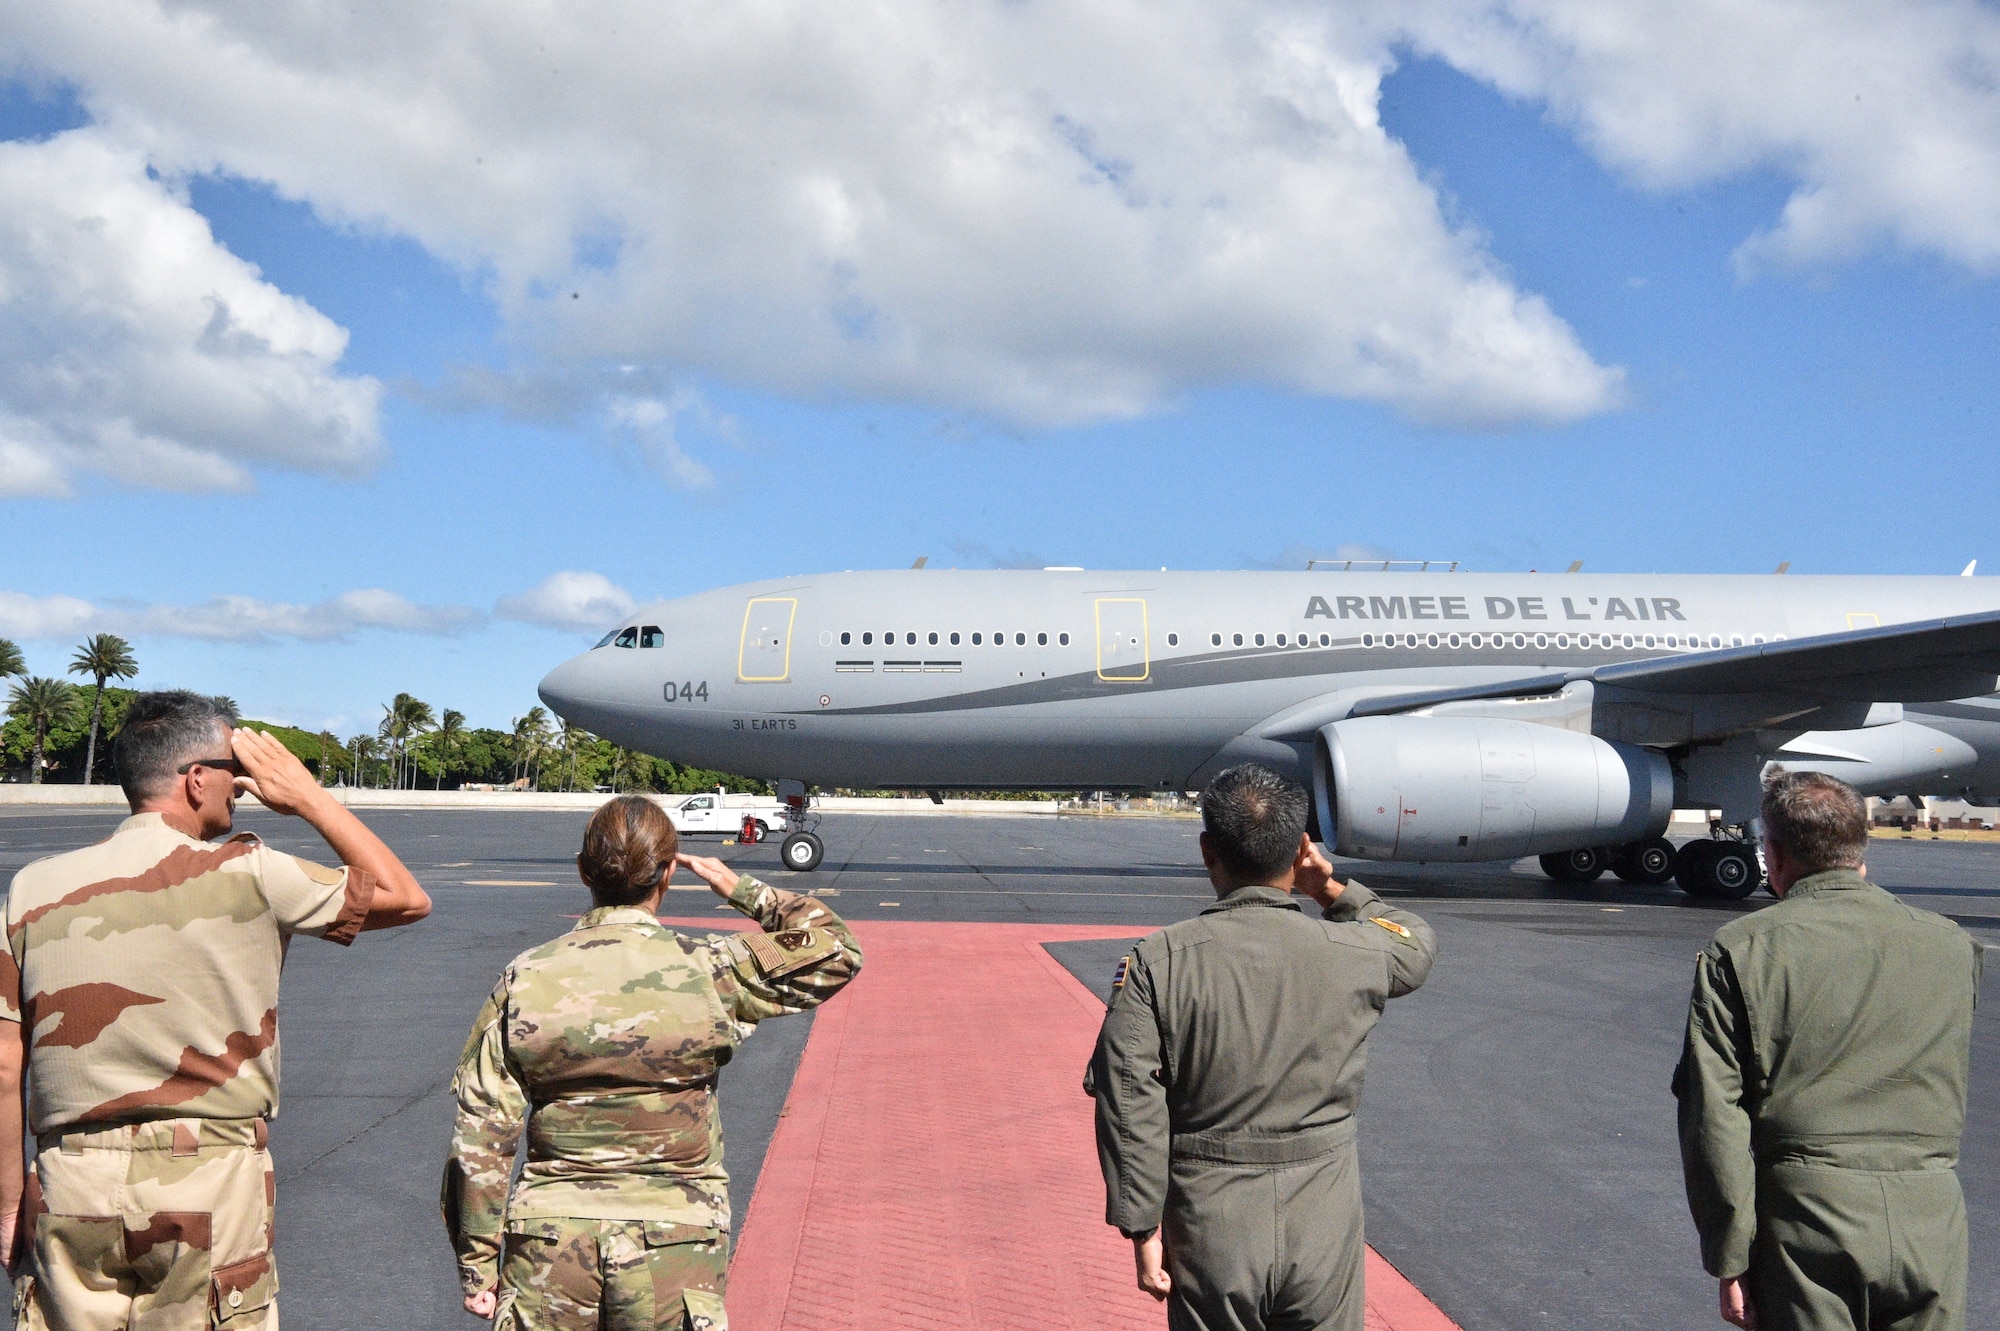 Members from the French Air and Space Force land in Hawaii as part of Exercise WAKEA, a joint U.S. and French training mission at Joint Base Pearl Harbor-Hickam, Hawaii, June 27, 2021. French airmen flew and trained alongside their U.S. counterparts to better understand each nation’s capabilities and how to work together in the future. (U.S. Air Force photo by 1st Lt. Benjamin Aronson)